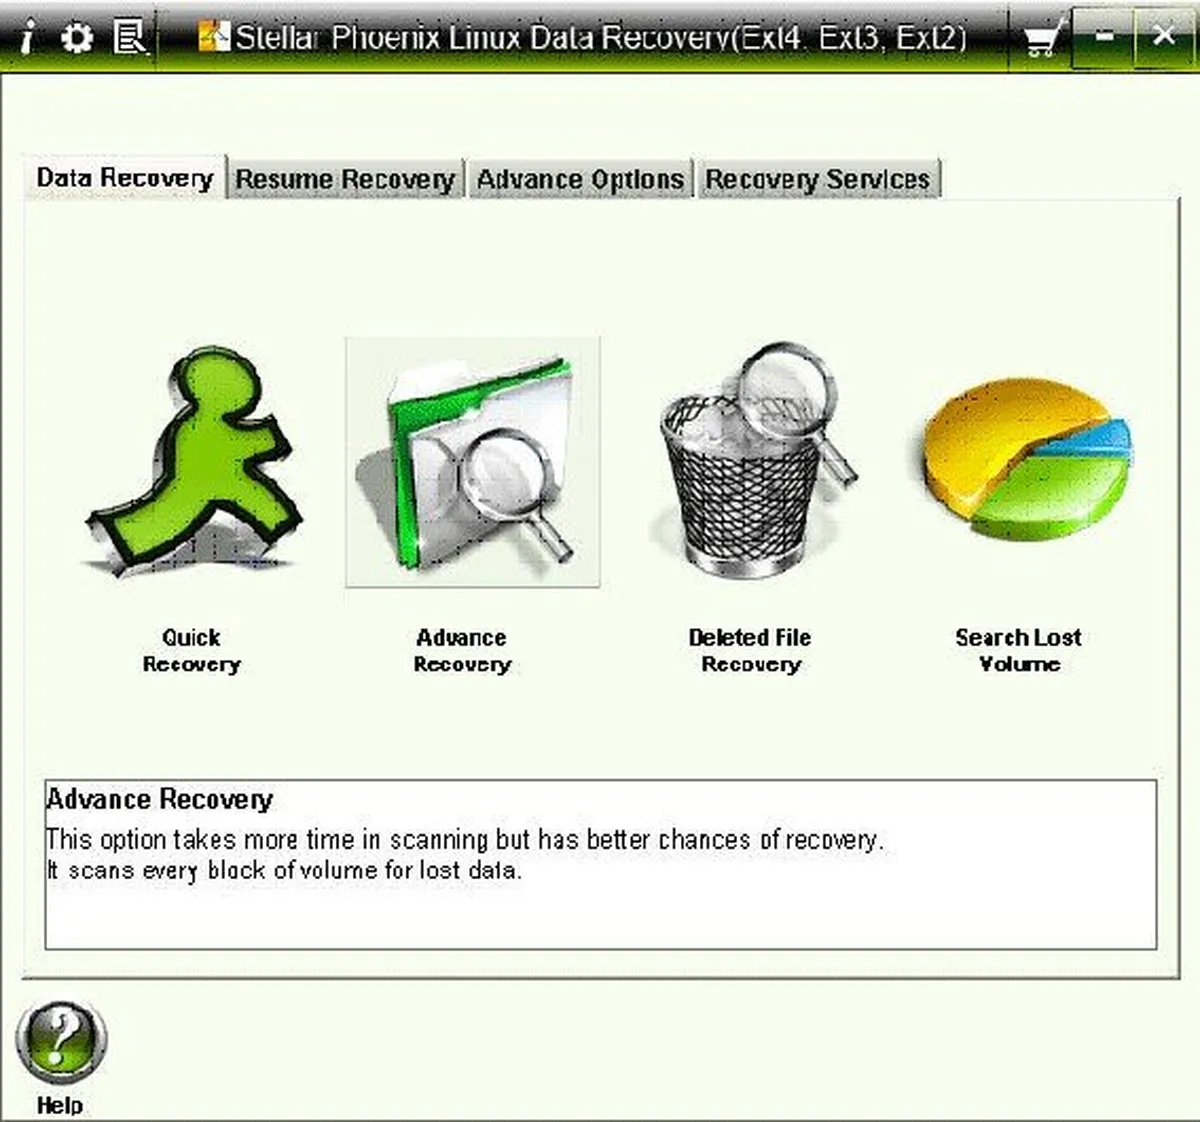 Stellar Phoenix Linux Data Recovery Review